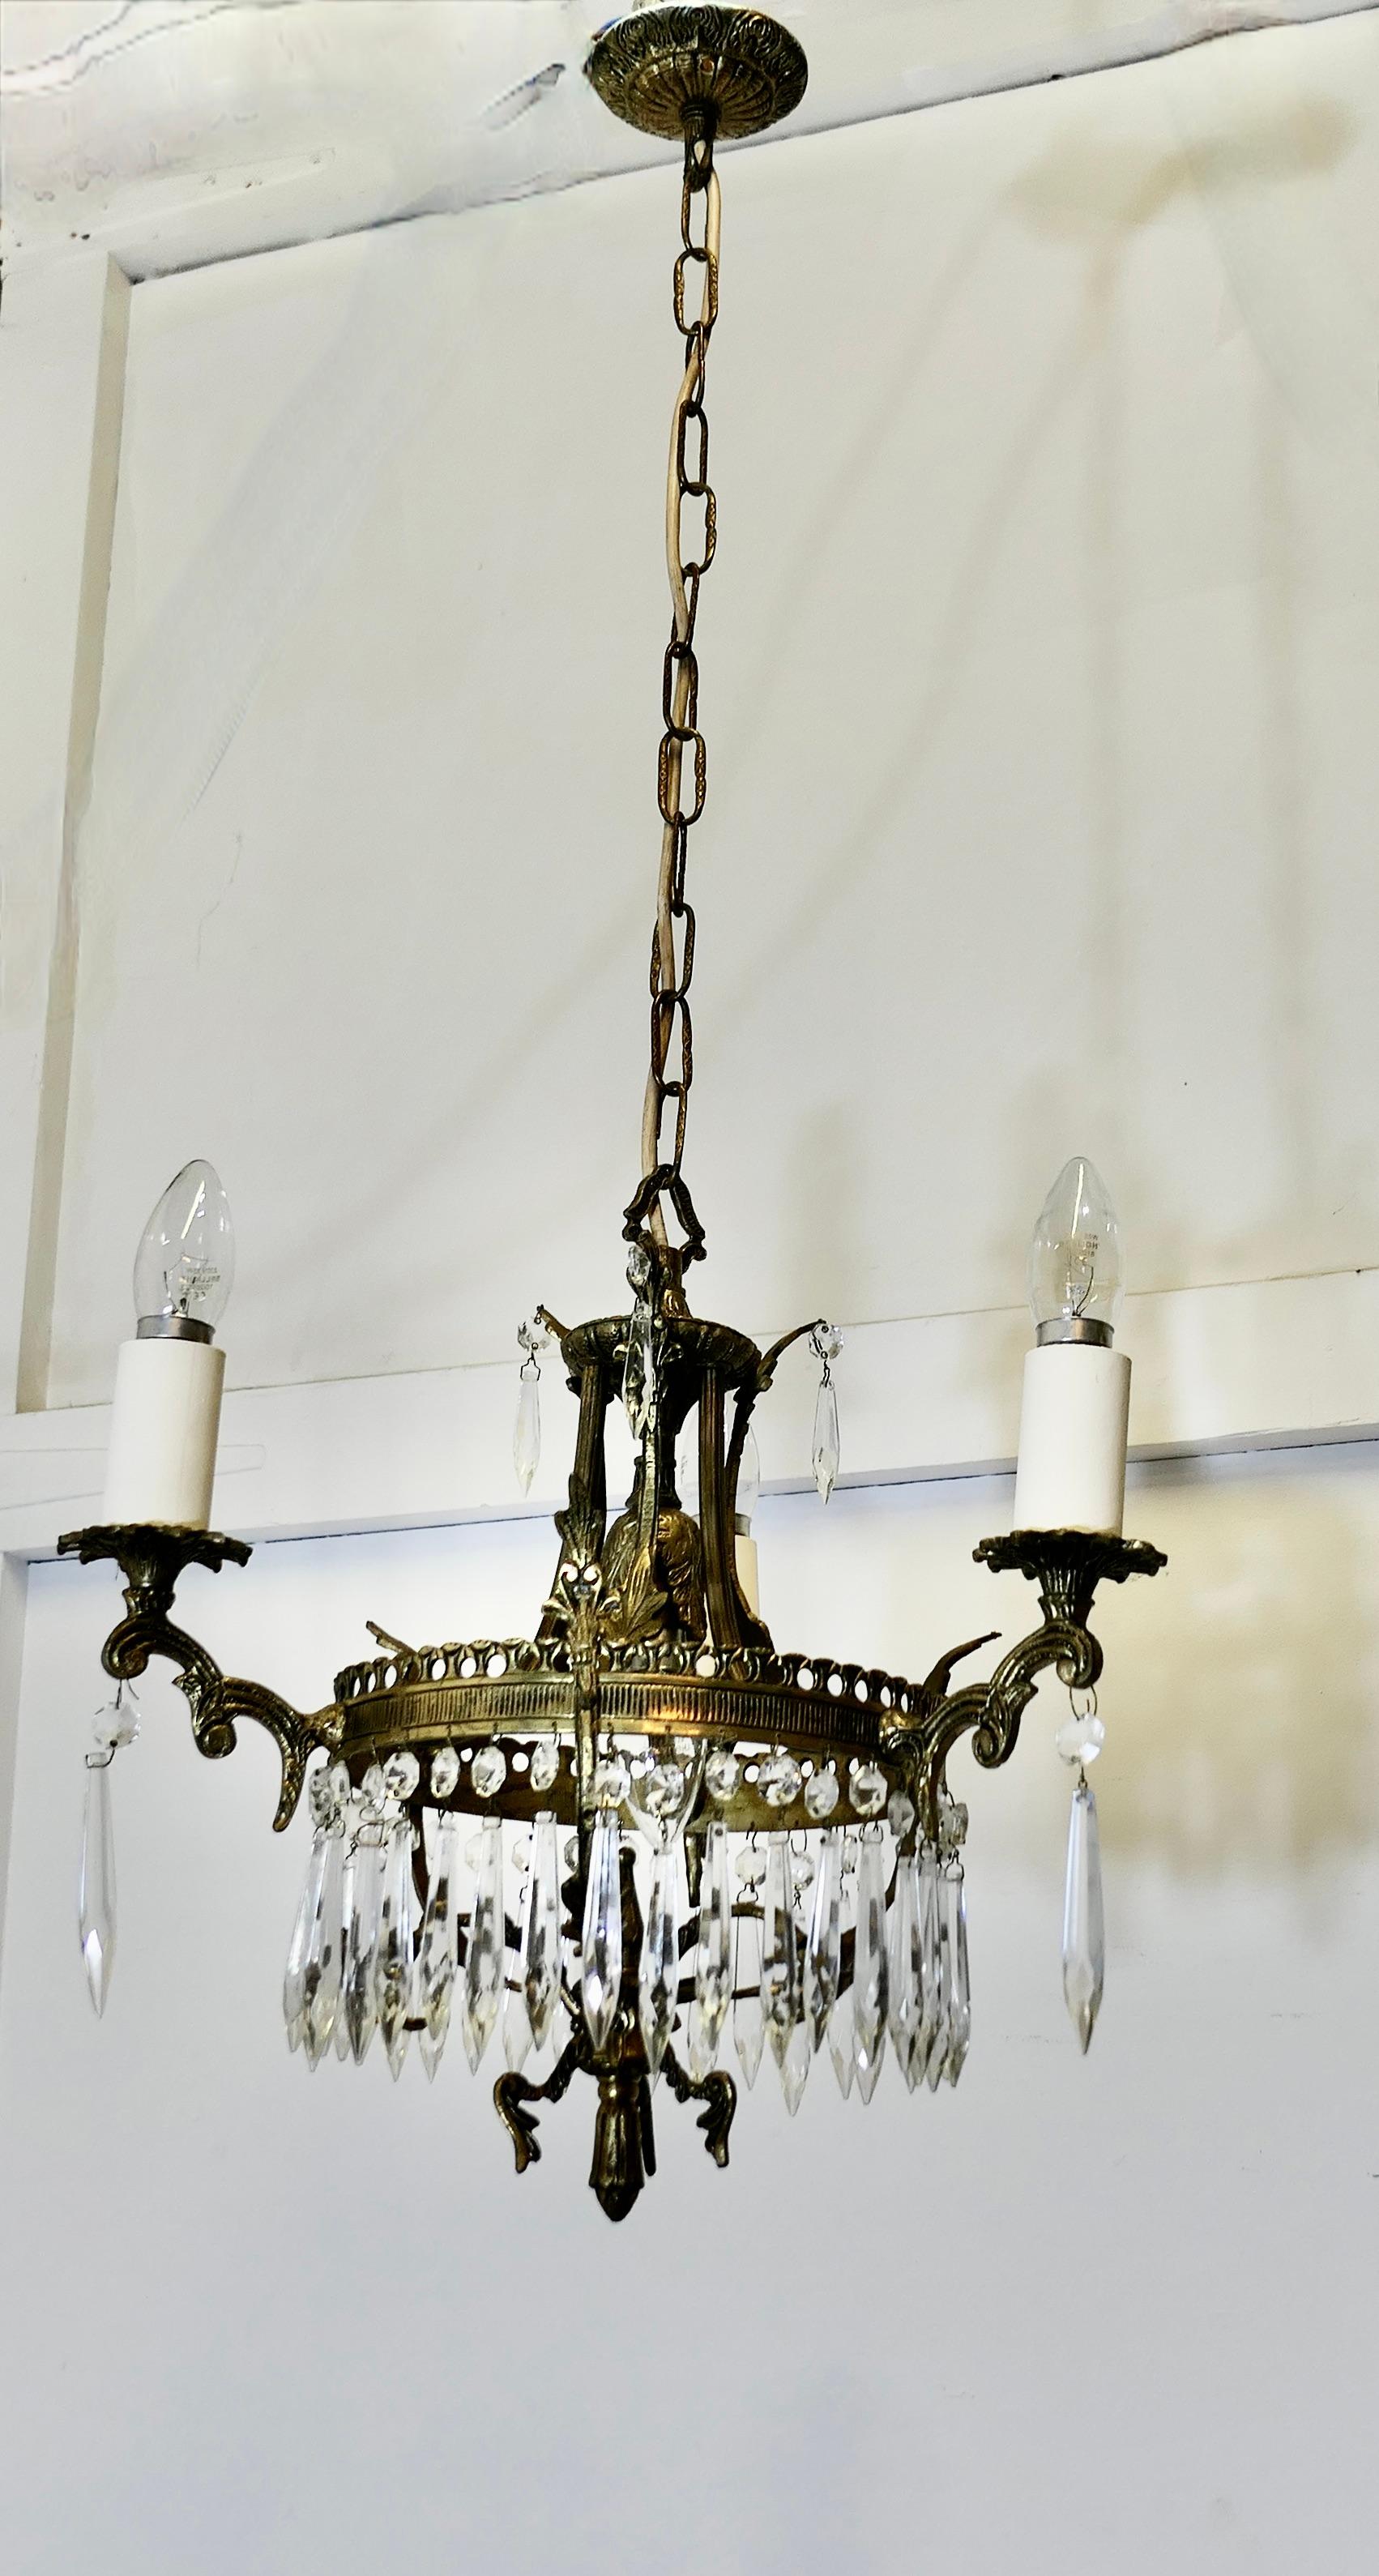 Early 20th Century A Stunning 3 Branch Brass and Crystal Chandelier   This is excellent quality  For Sale